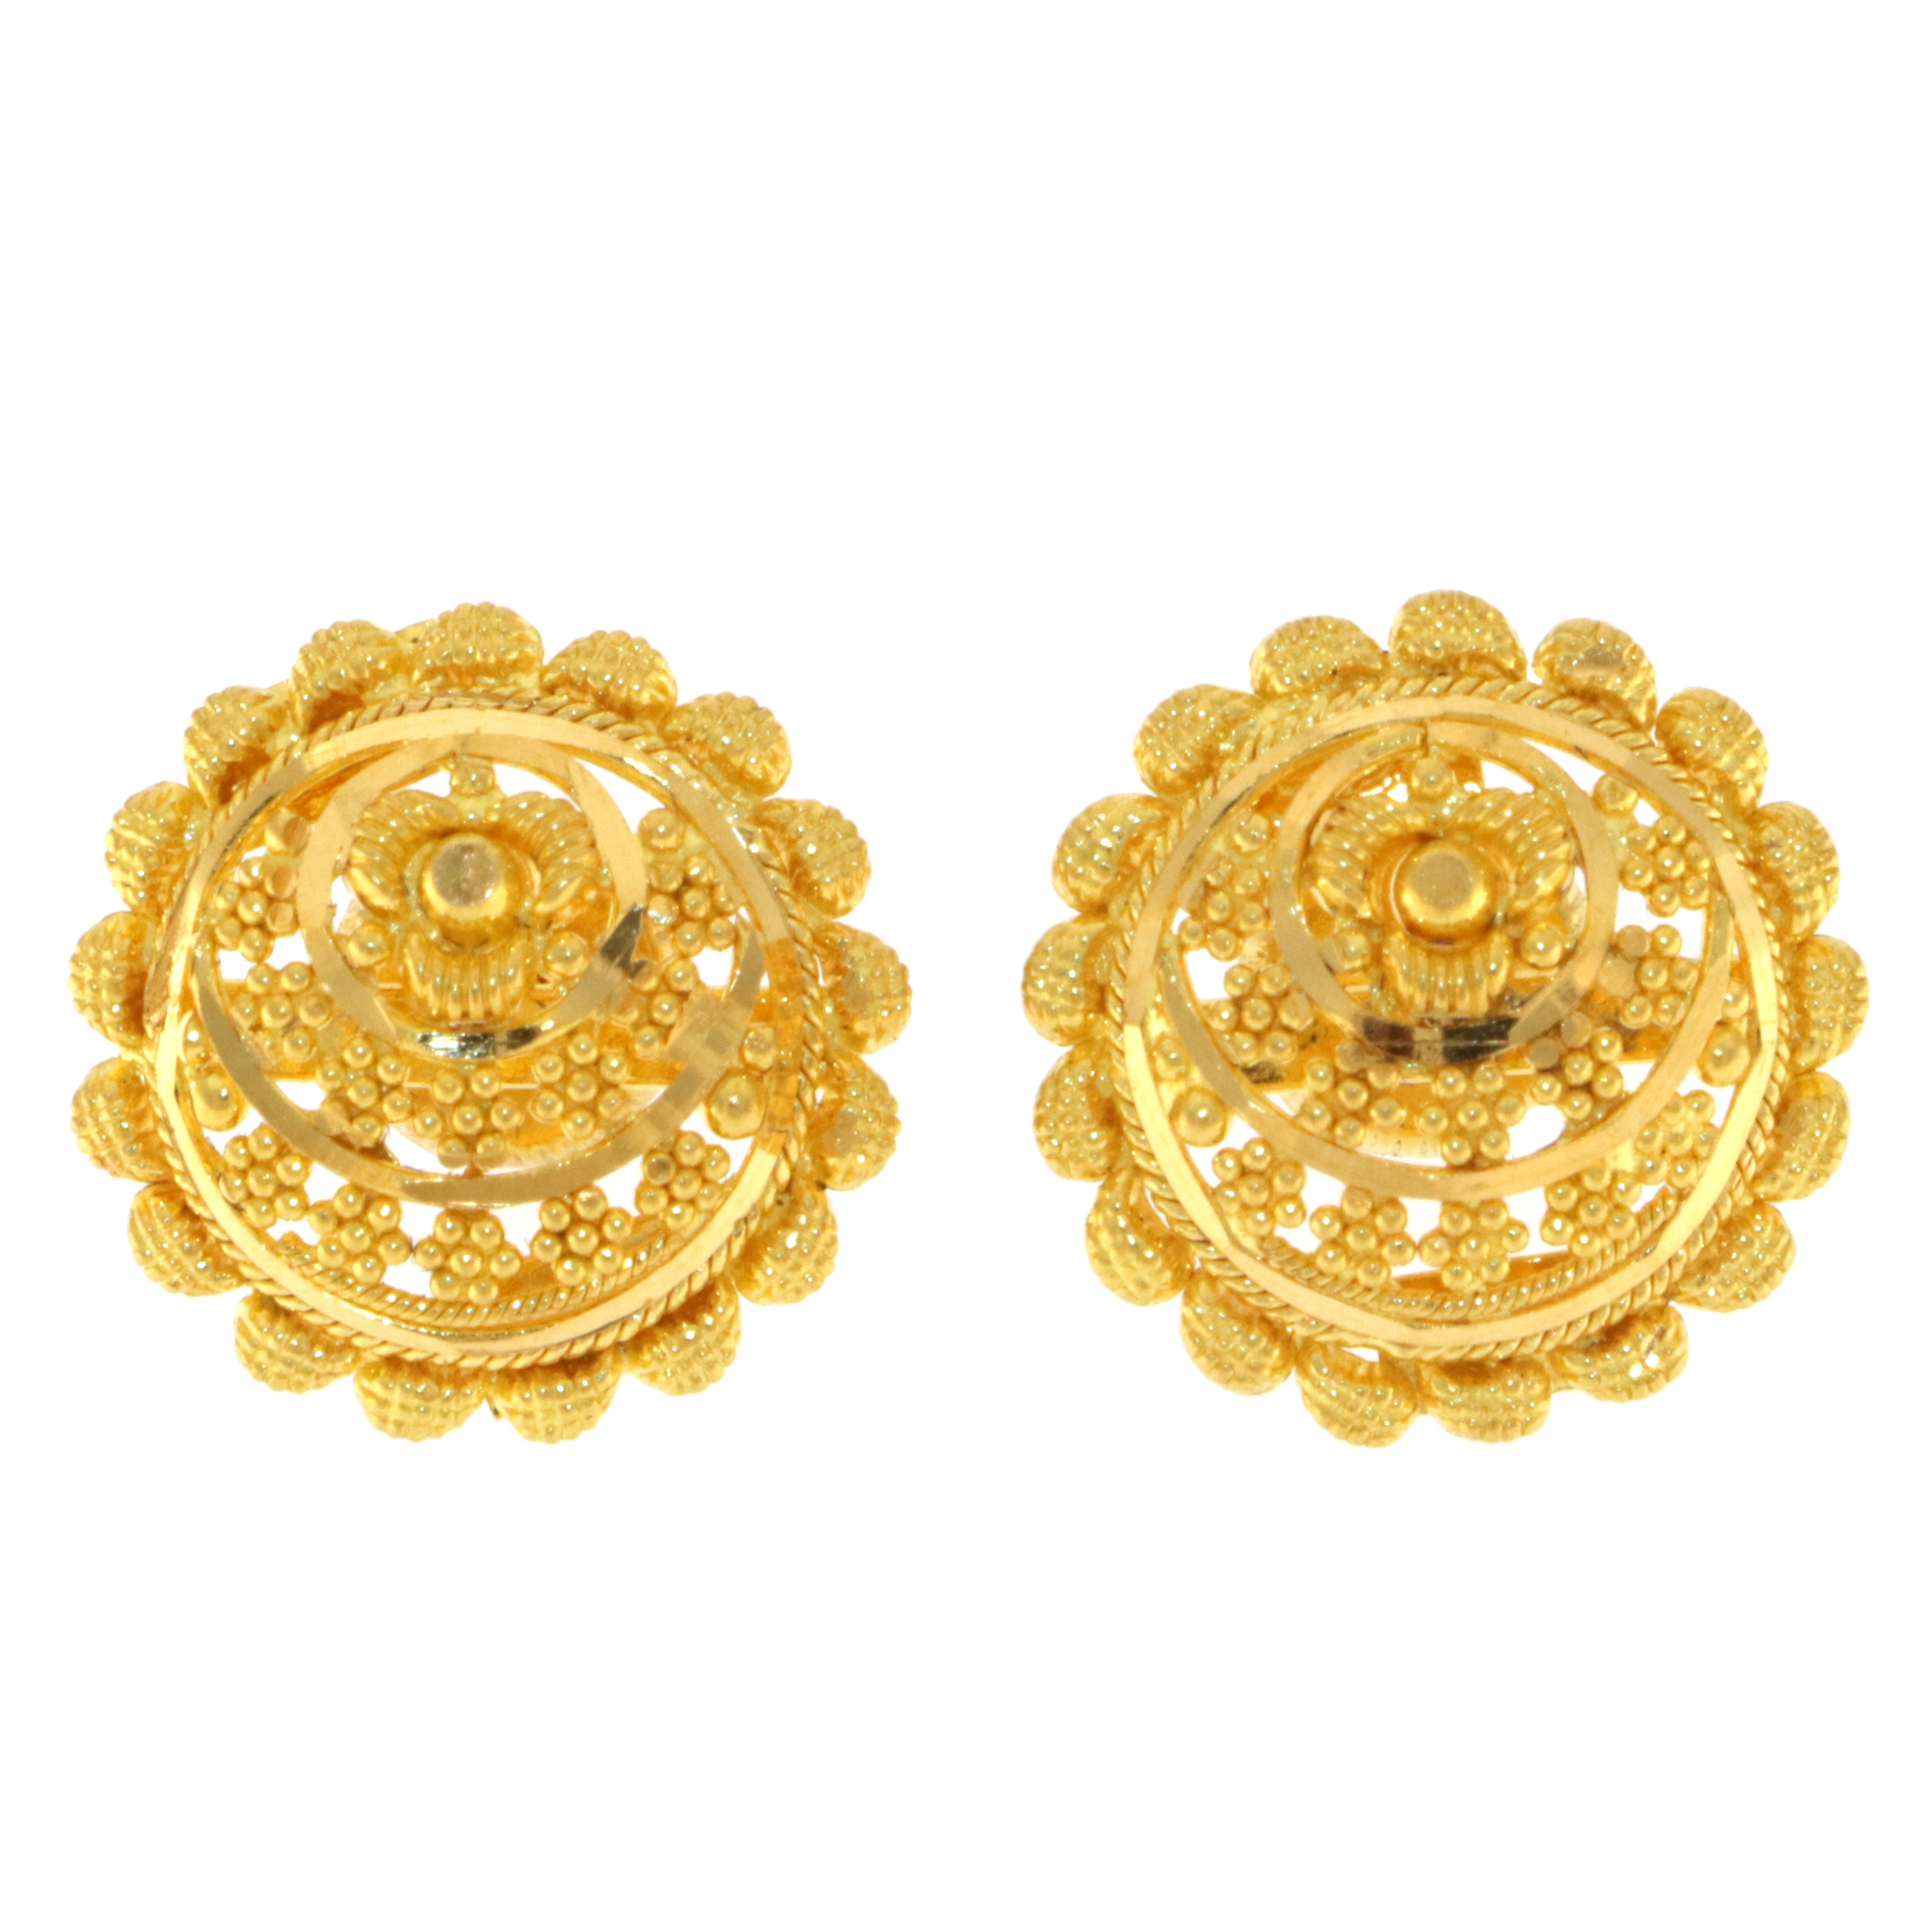 22ct Real Gold Asian/Indian/Pakistani Style Filigree Flower Stud Earrings